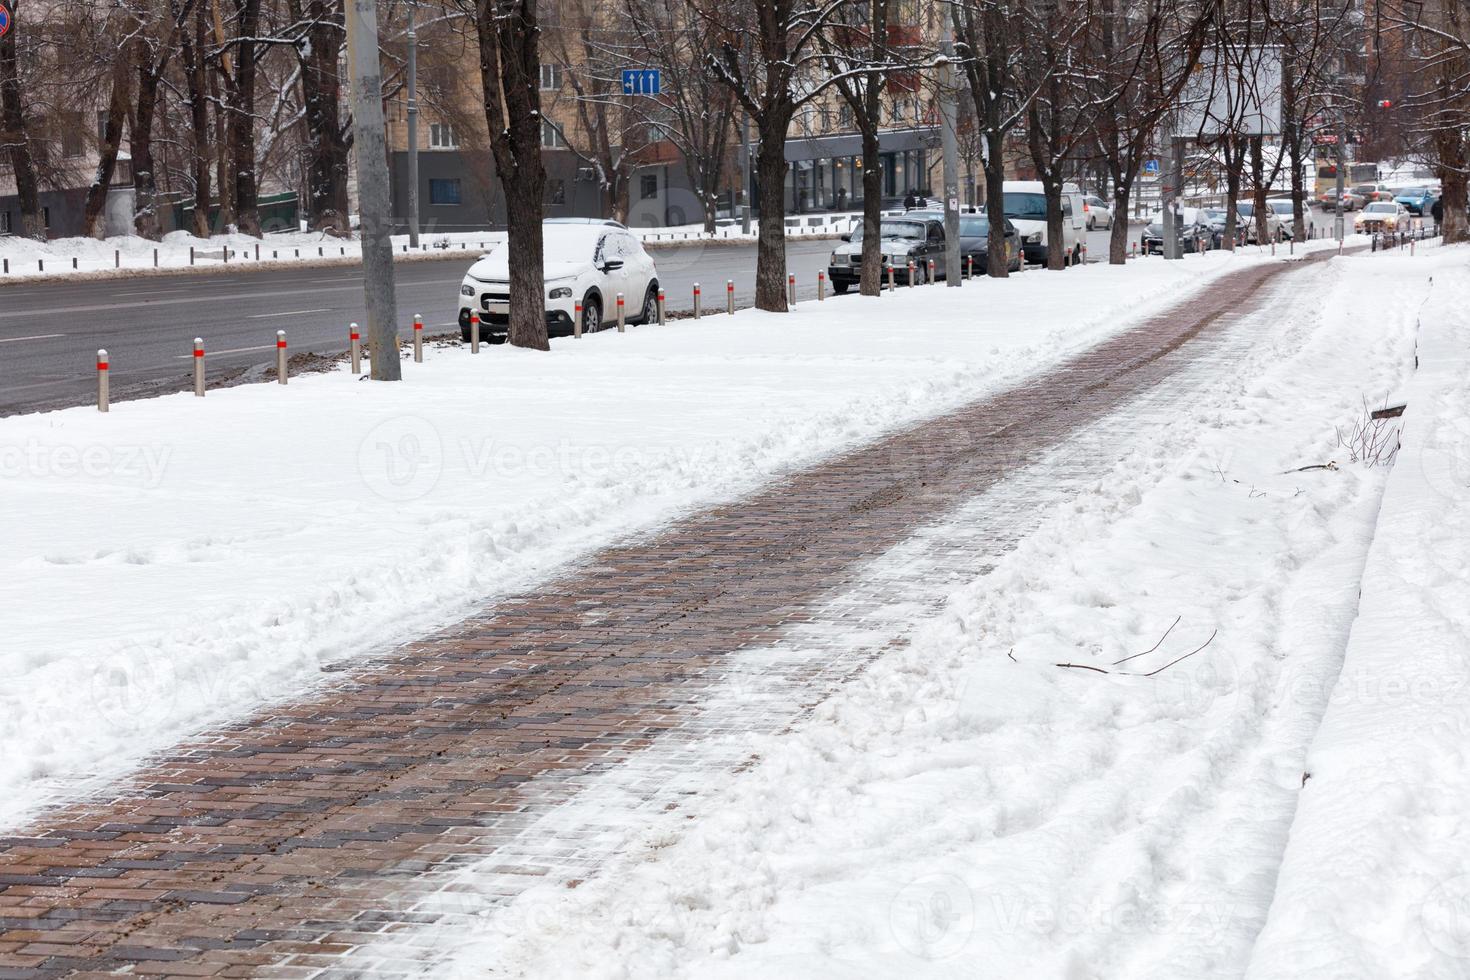 The sidewalk cleared of snow runs along the carriageway of the city street. photo